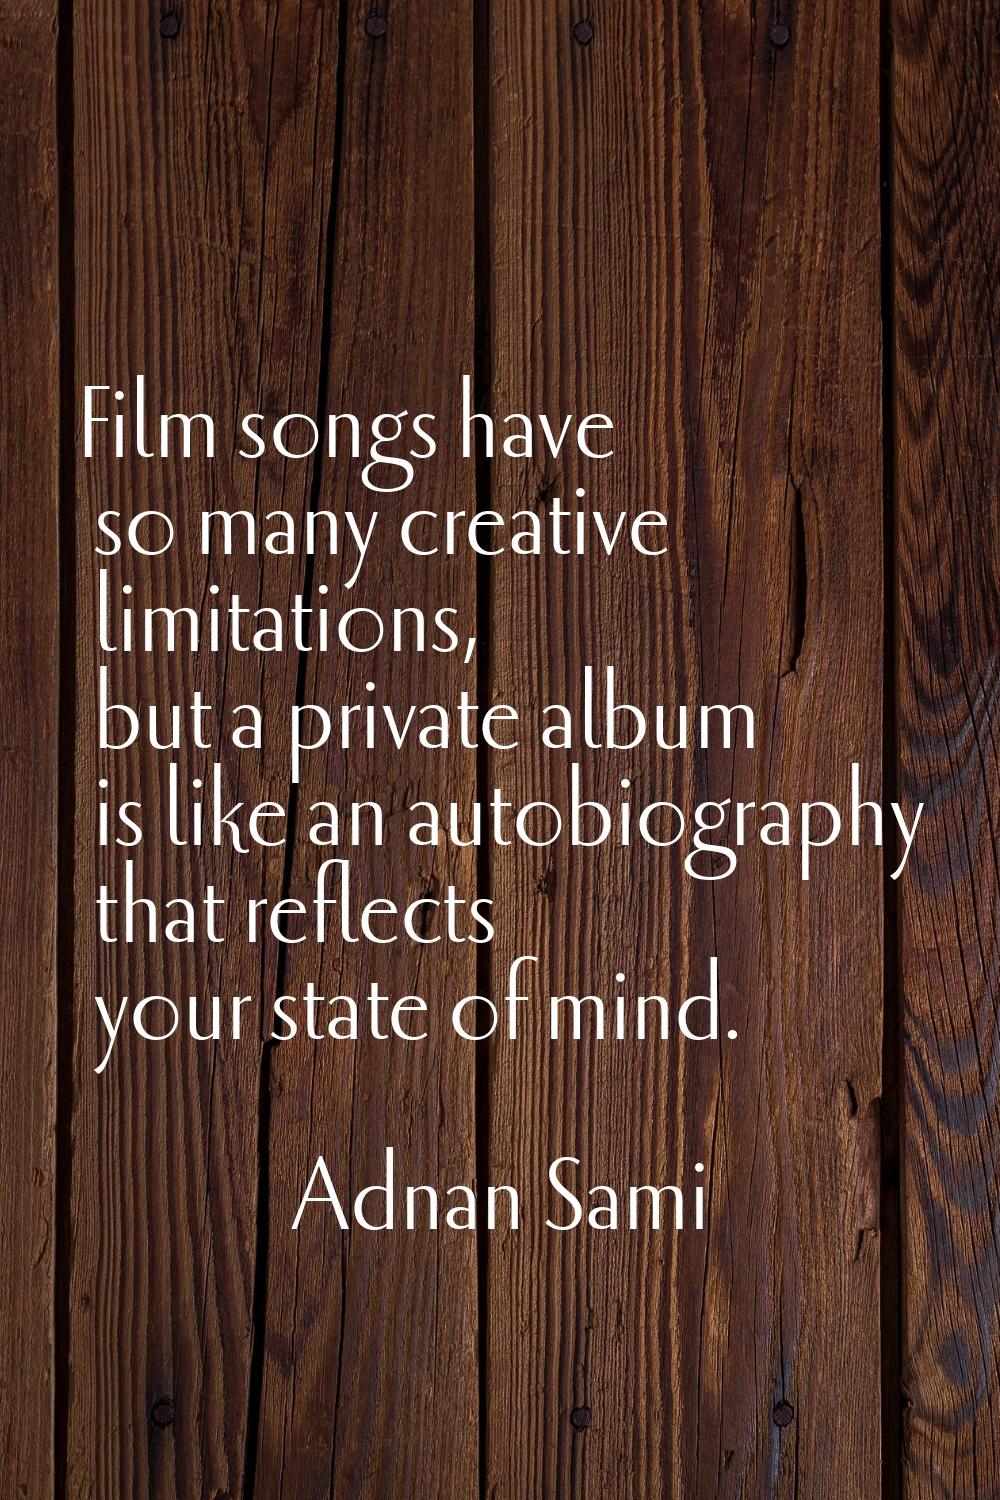 Film songs have so many creative limitations, but a private album is like an autobiography that ref